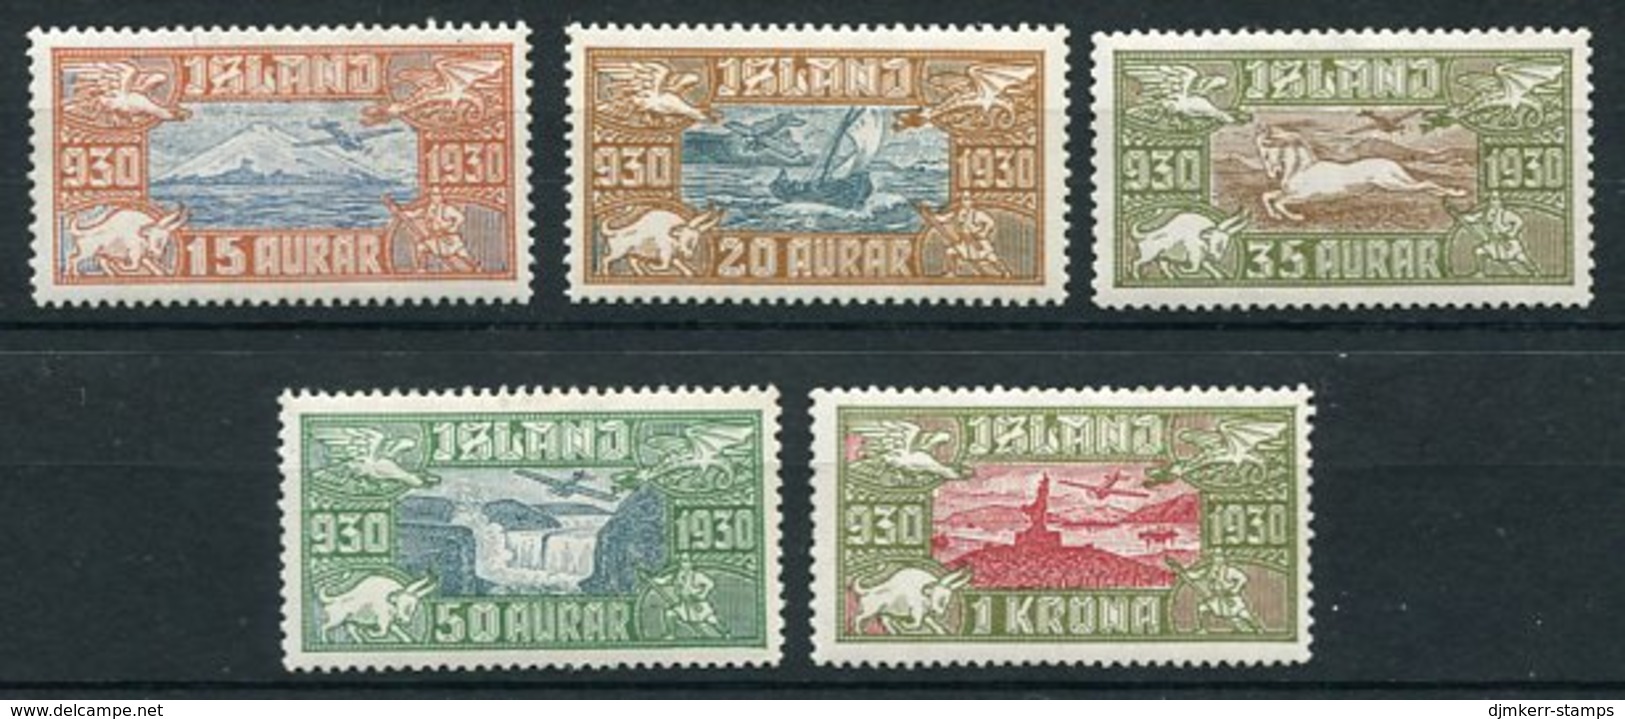 ICELAND 1930 Millenary Airmail Set Of 5 LHM / *.  Michel 142-46; Facit 189-93 - Unused Stamps